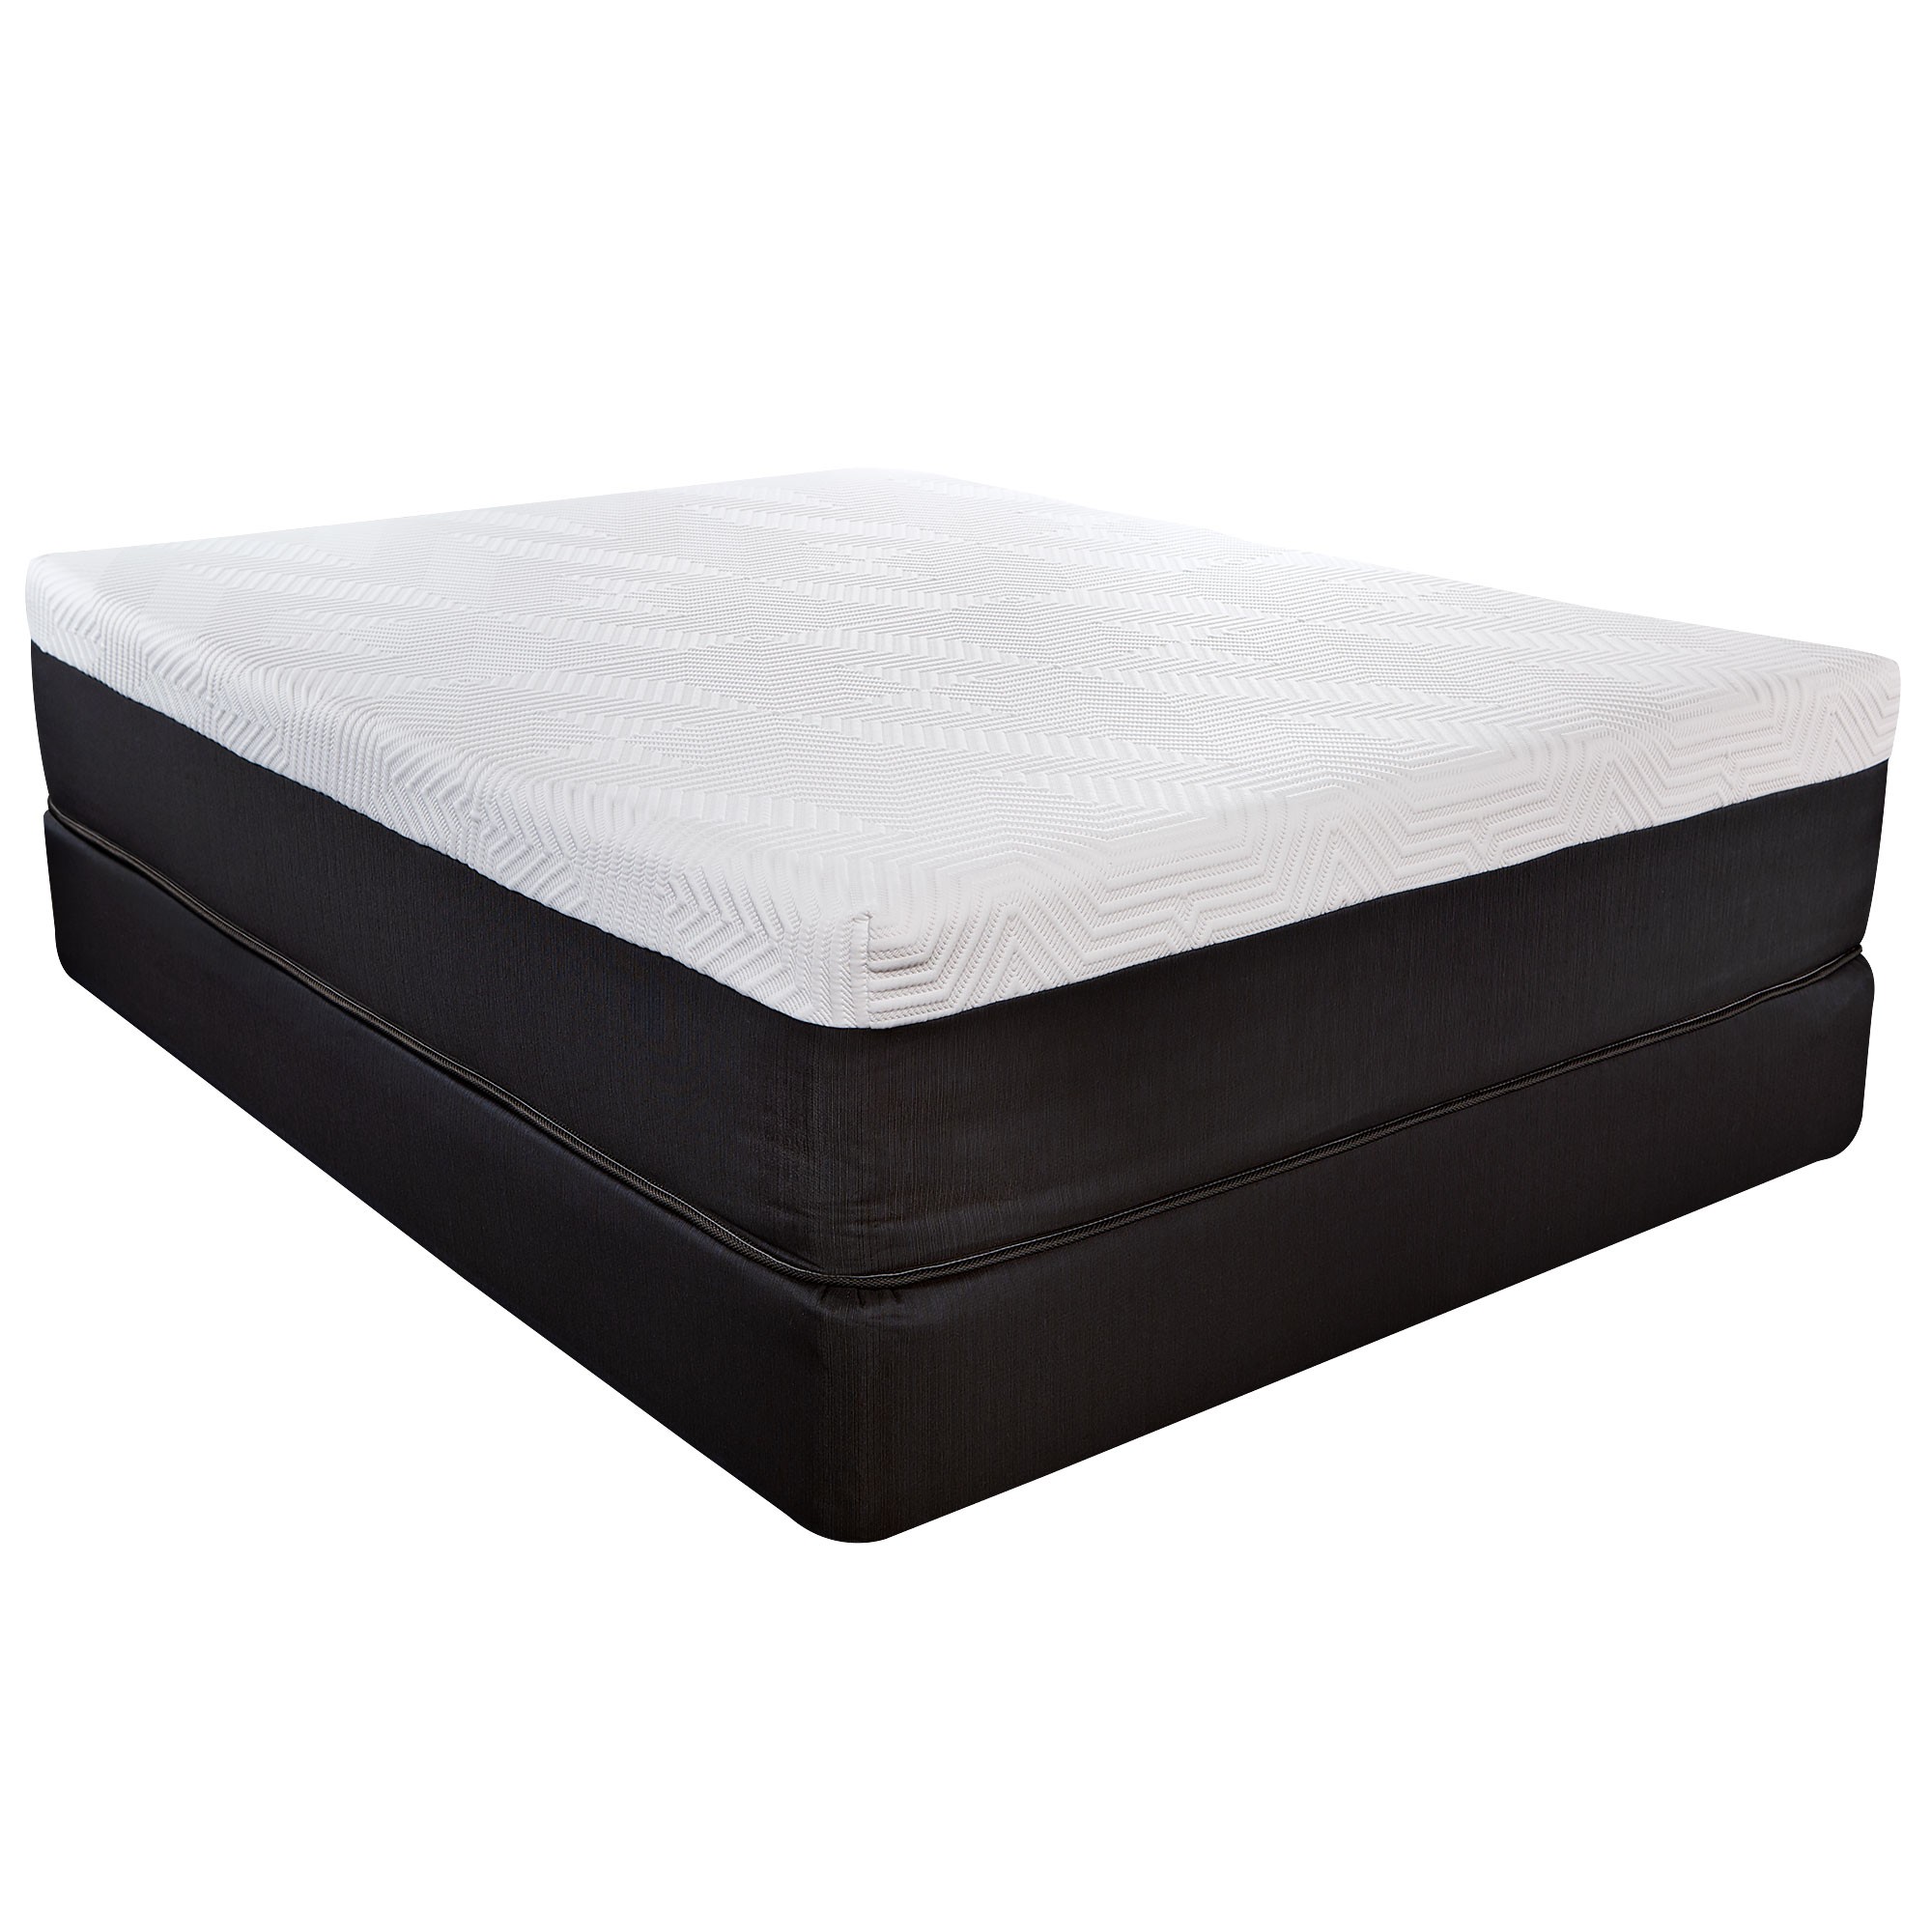 14" Hybrid Lux Memory Foam And Wrapped Coil Mattress King-391697-1